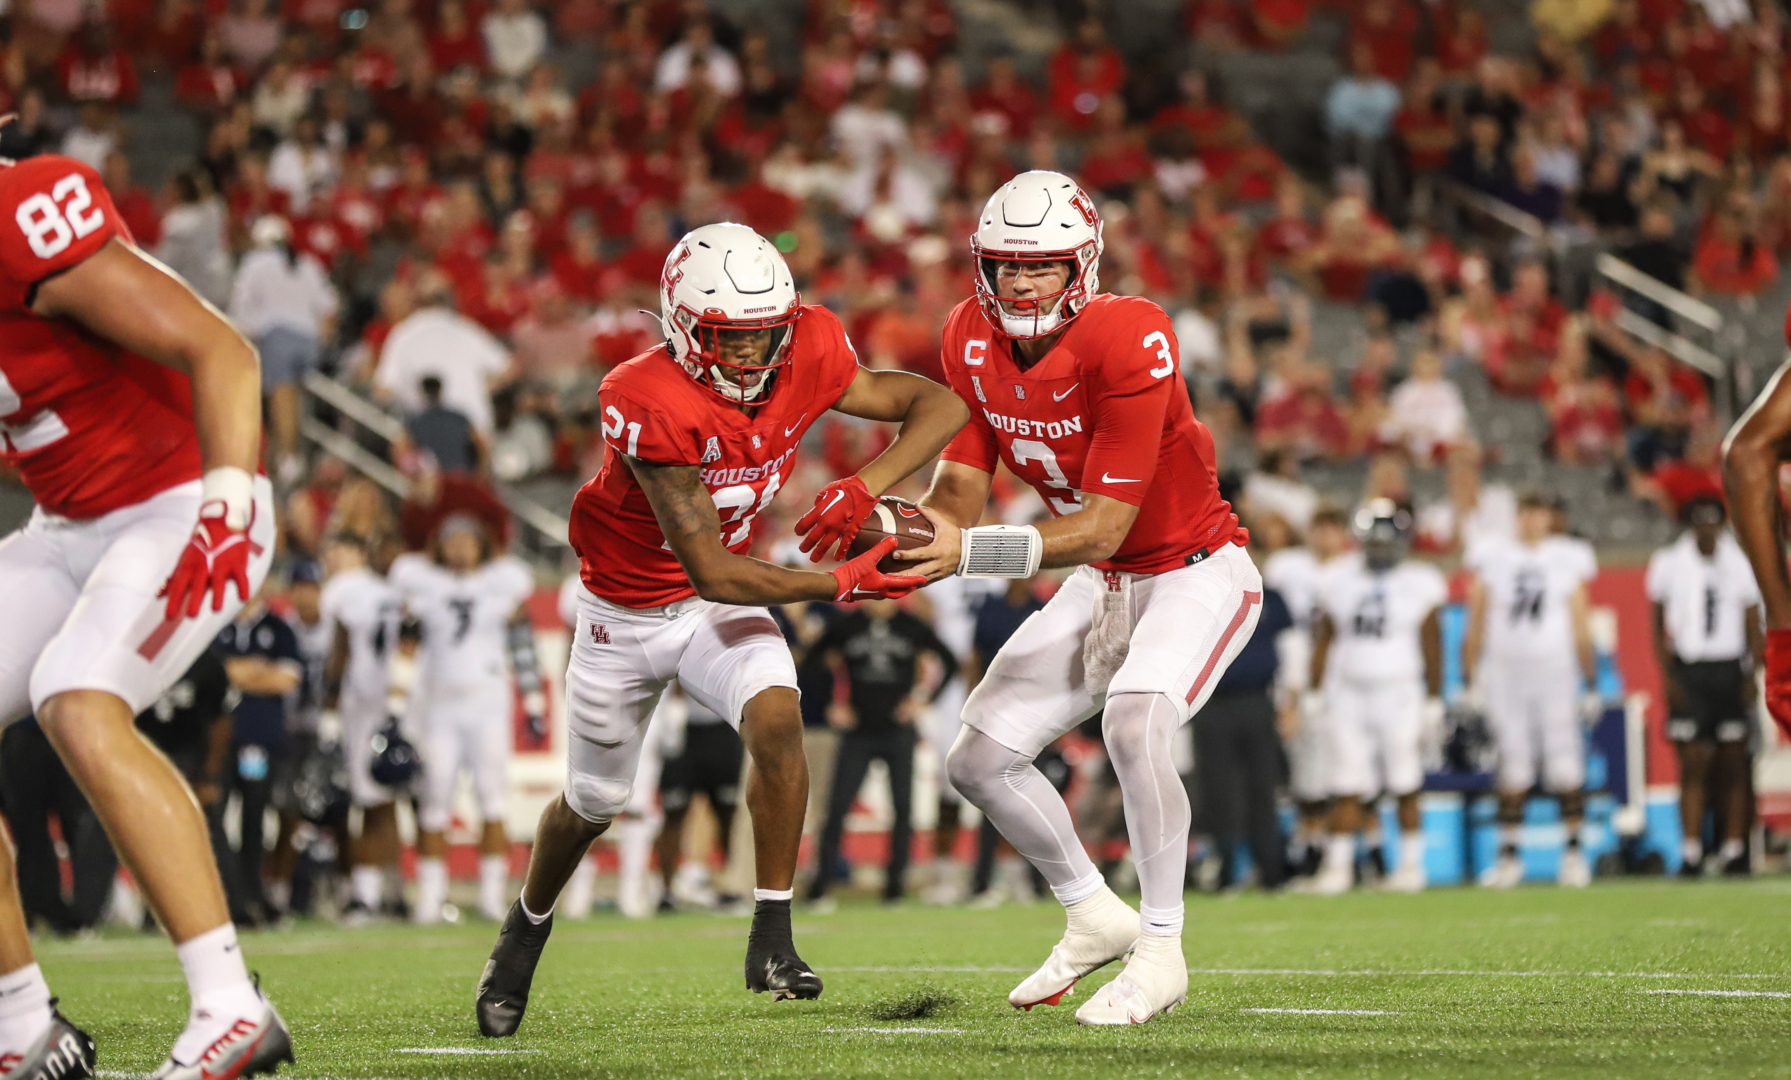 UH football enters AAC play at 2-2 following a 7-point victory over Rice in the Bayou Bucket on Saturday. | Sean Thomas/The Cougar